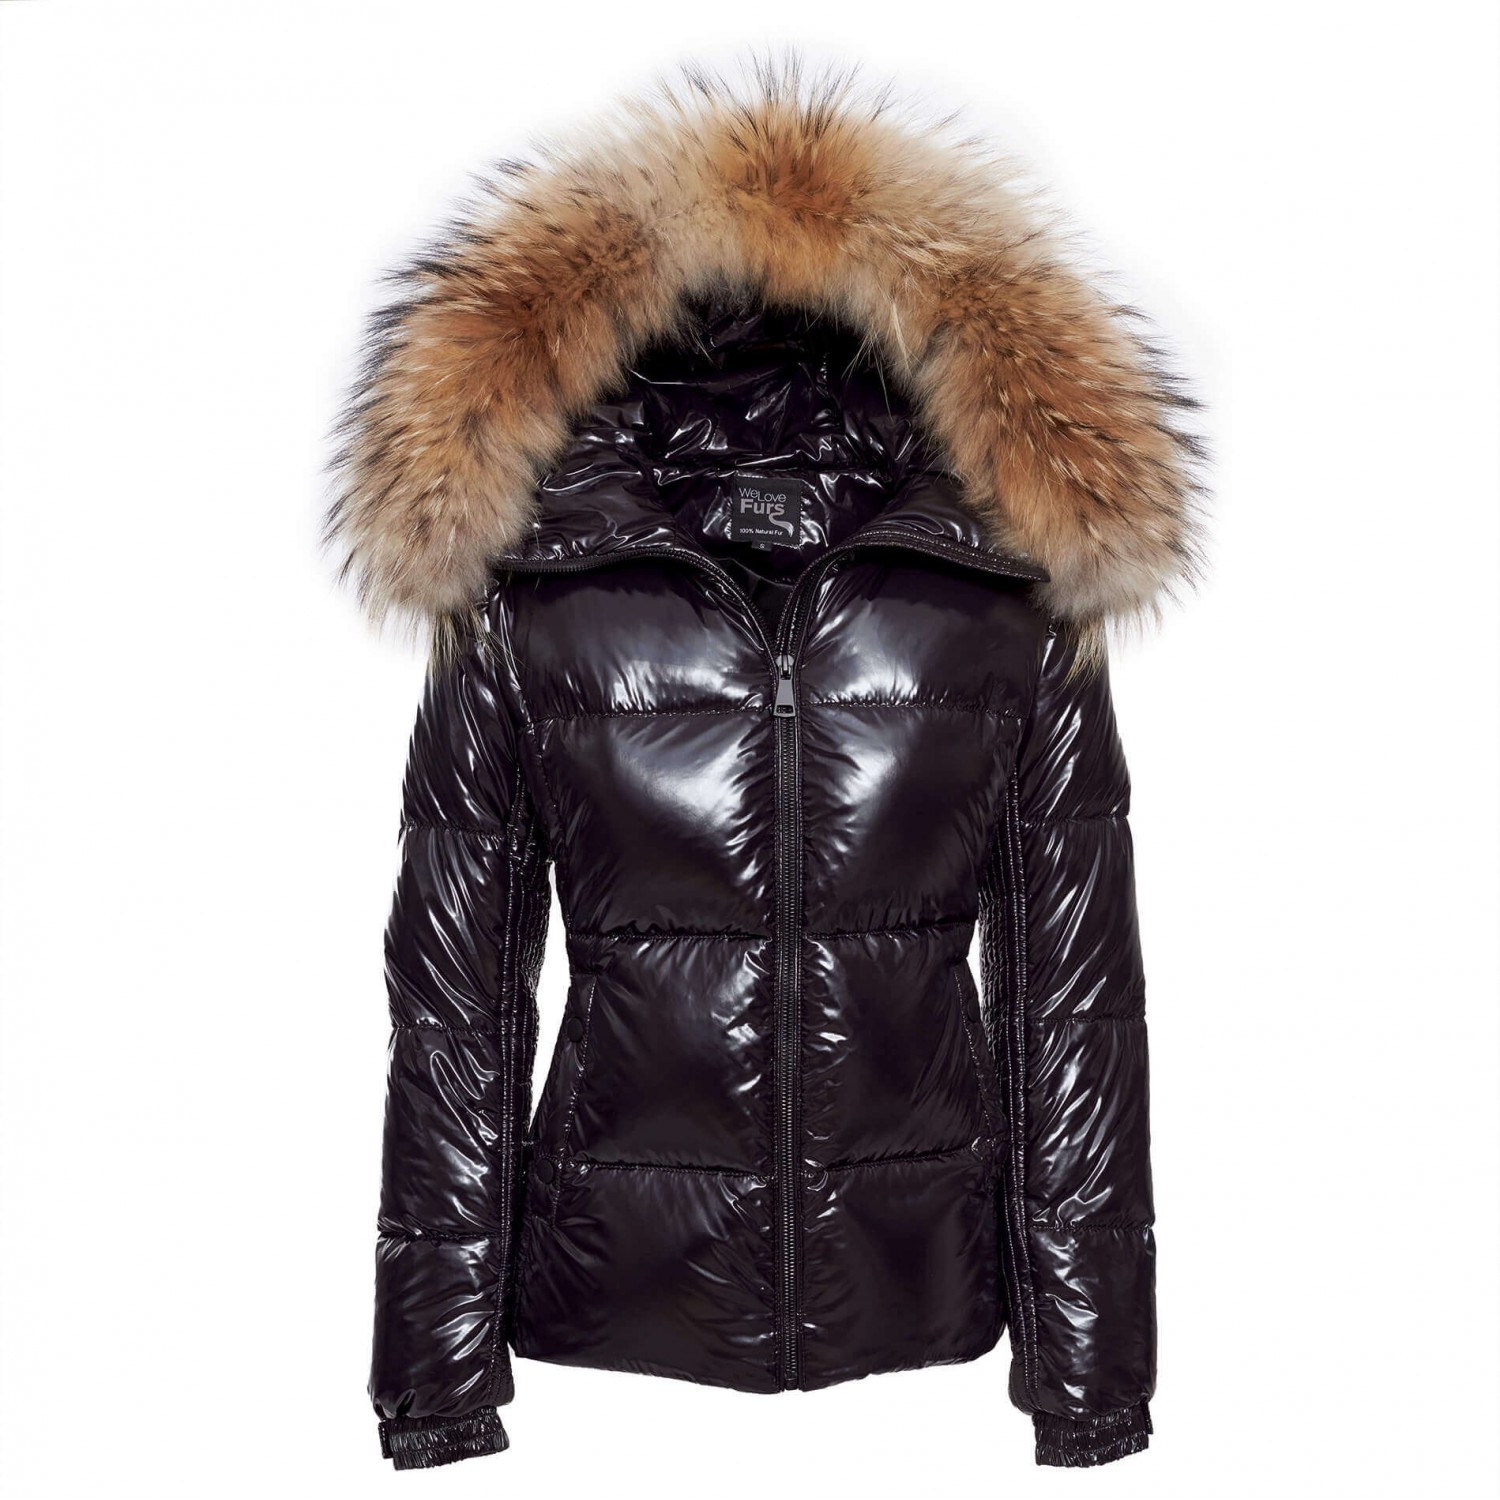 Puffer jacket with real fur hood